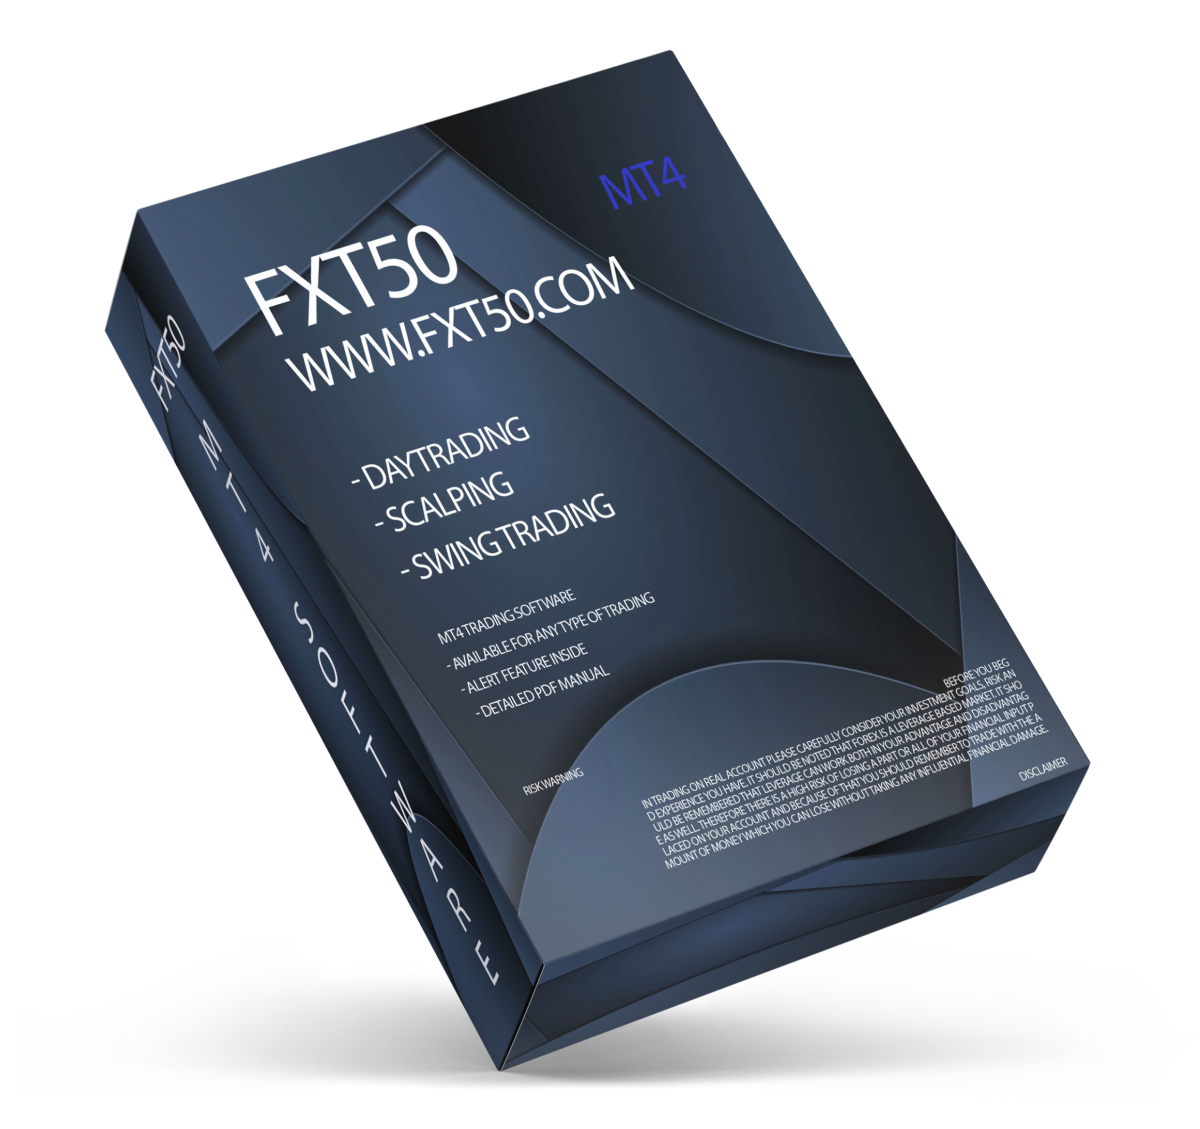 FXT50 MT4 TRADING SOFTWARE